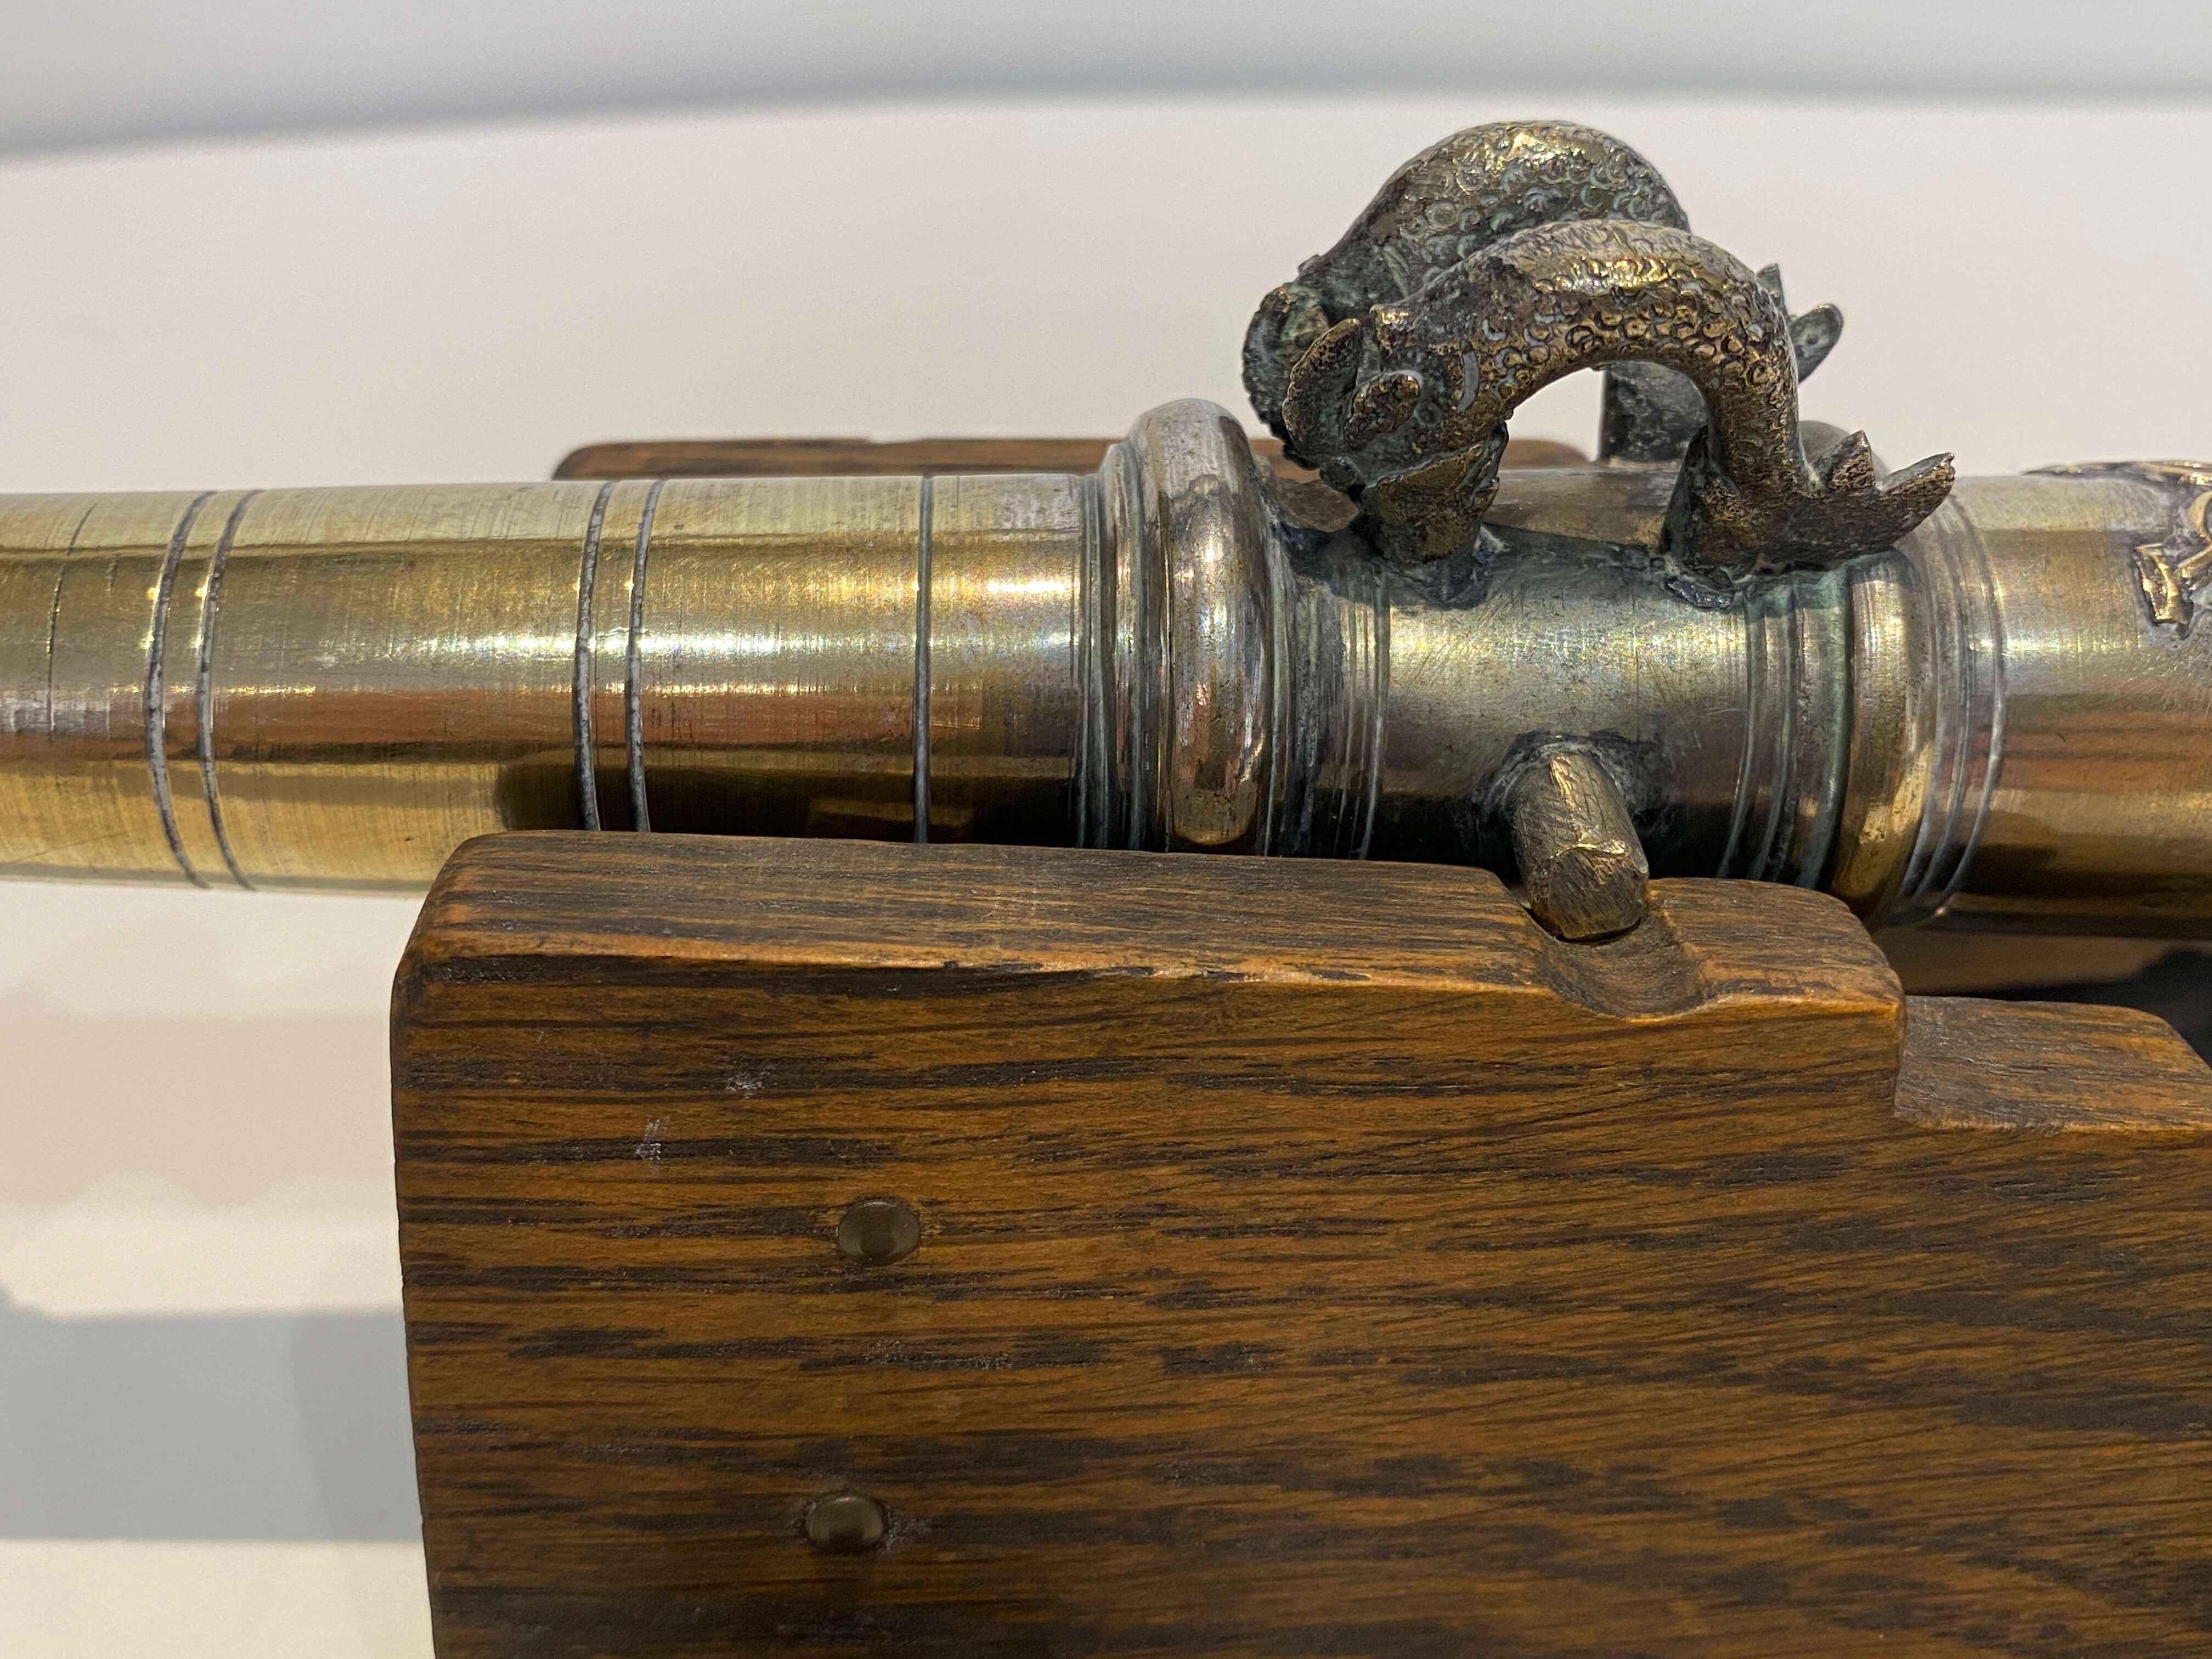 A miniature metal replica of a VOC cannon manufactured by Bill Pace, 20th century